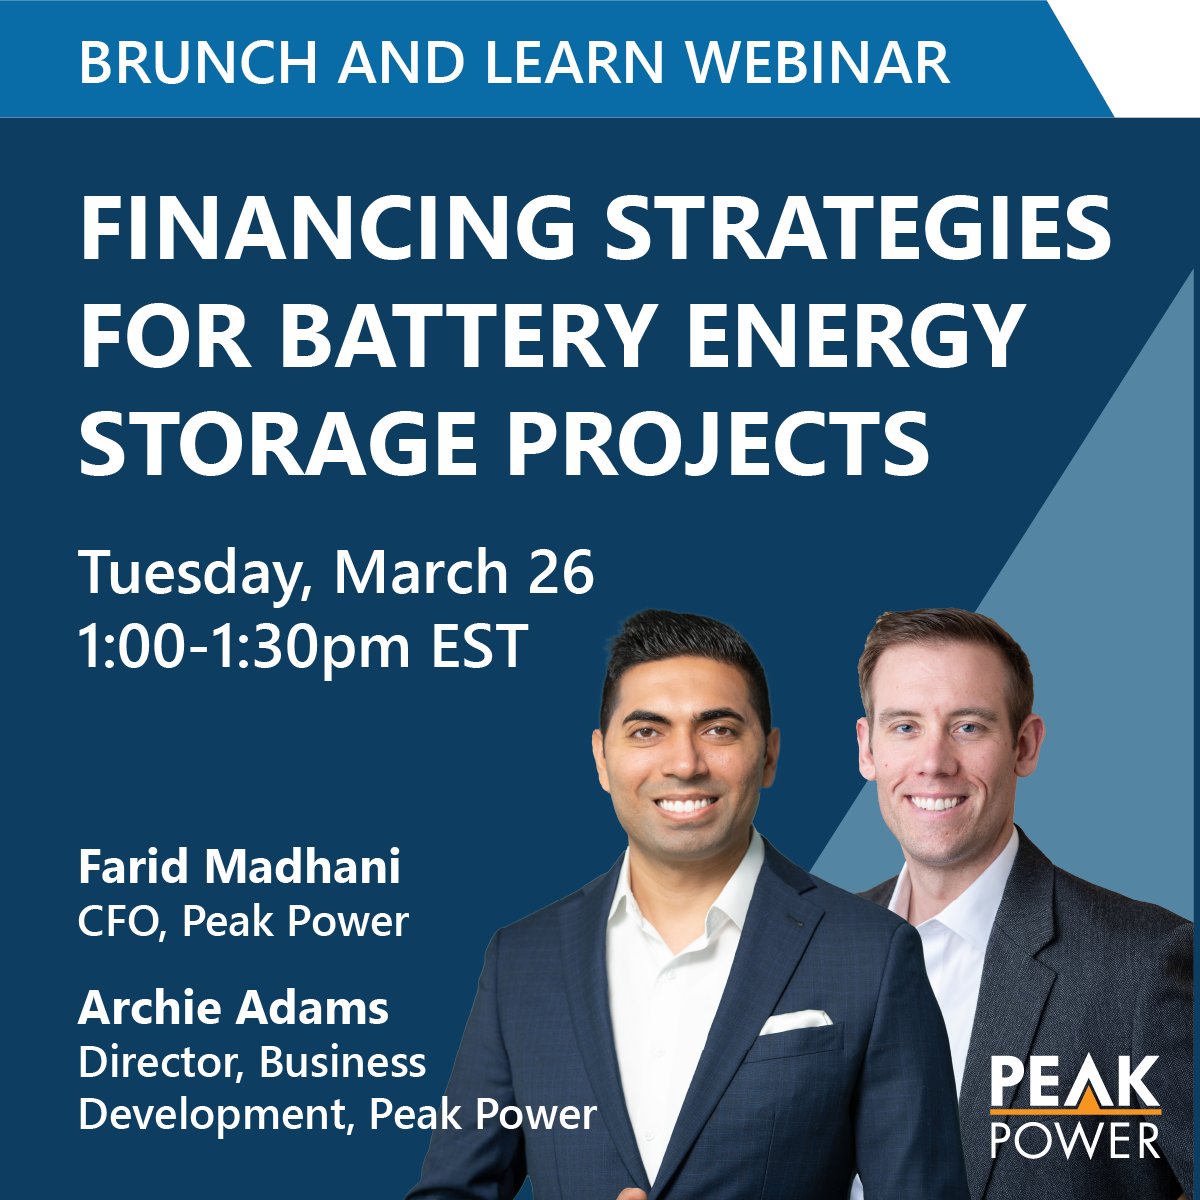 🚨 5 days left to register! Gain insights on battery energy storage project financing, site selection, and financial evaluation. Plus, get your burning questions answered by our Chief Financial Officer and Director of Business Development. hubs.ly/Q02q9GrH0